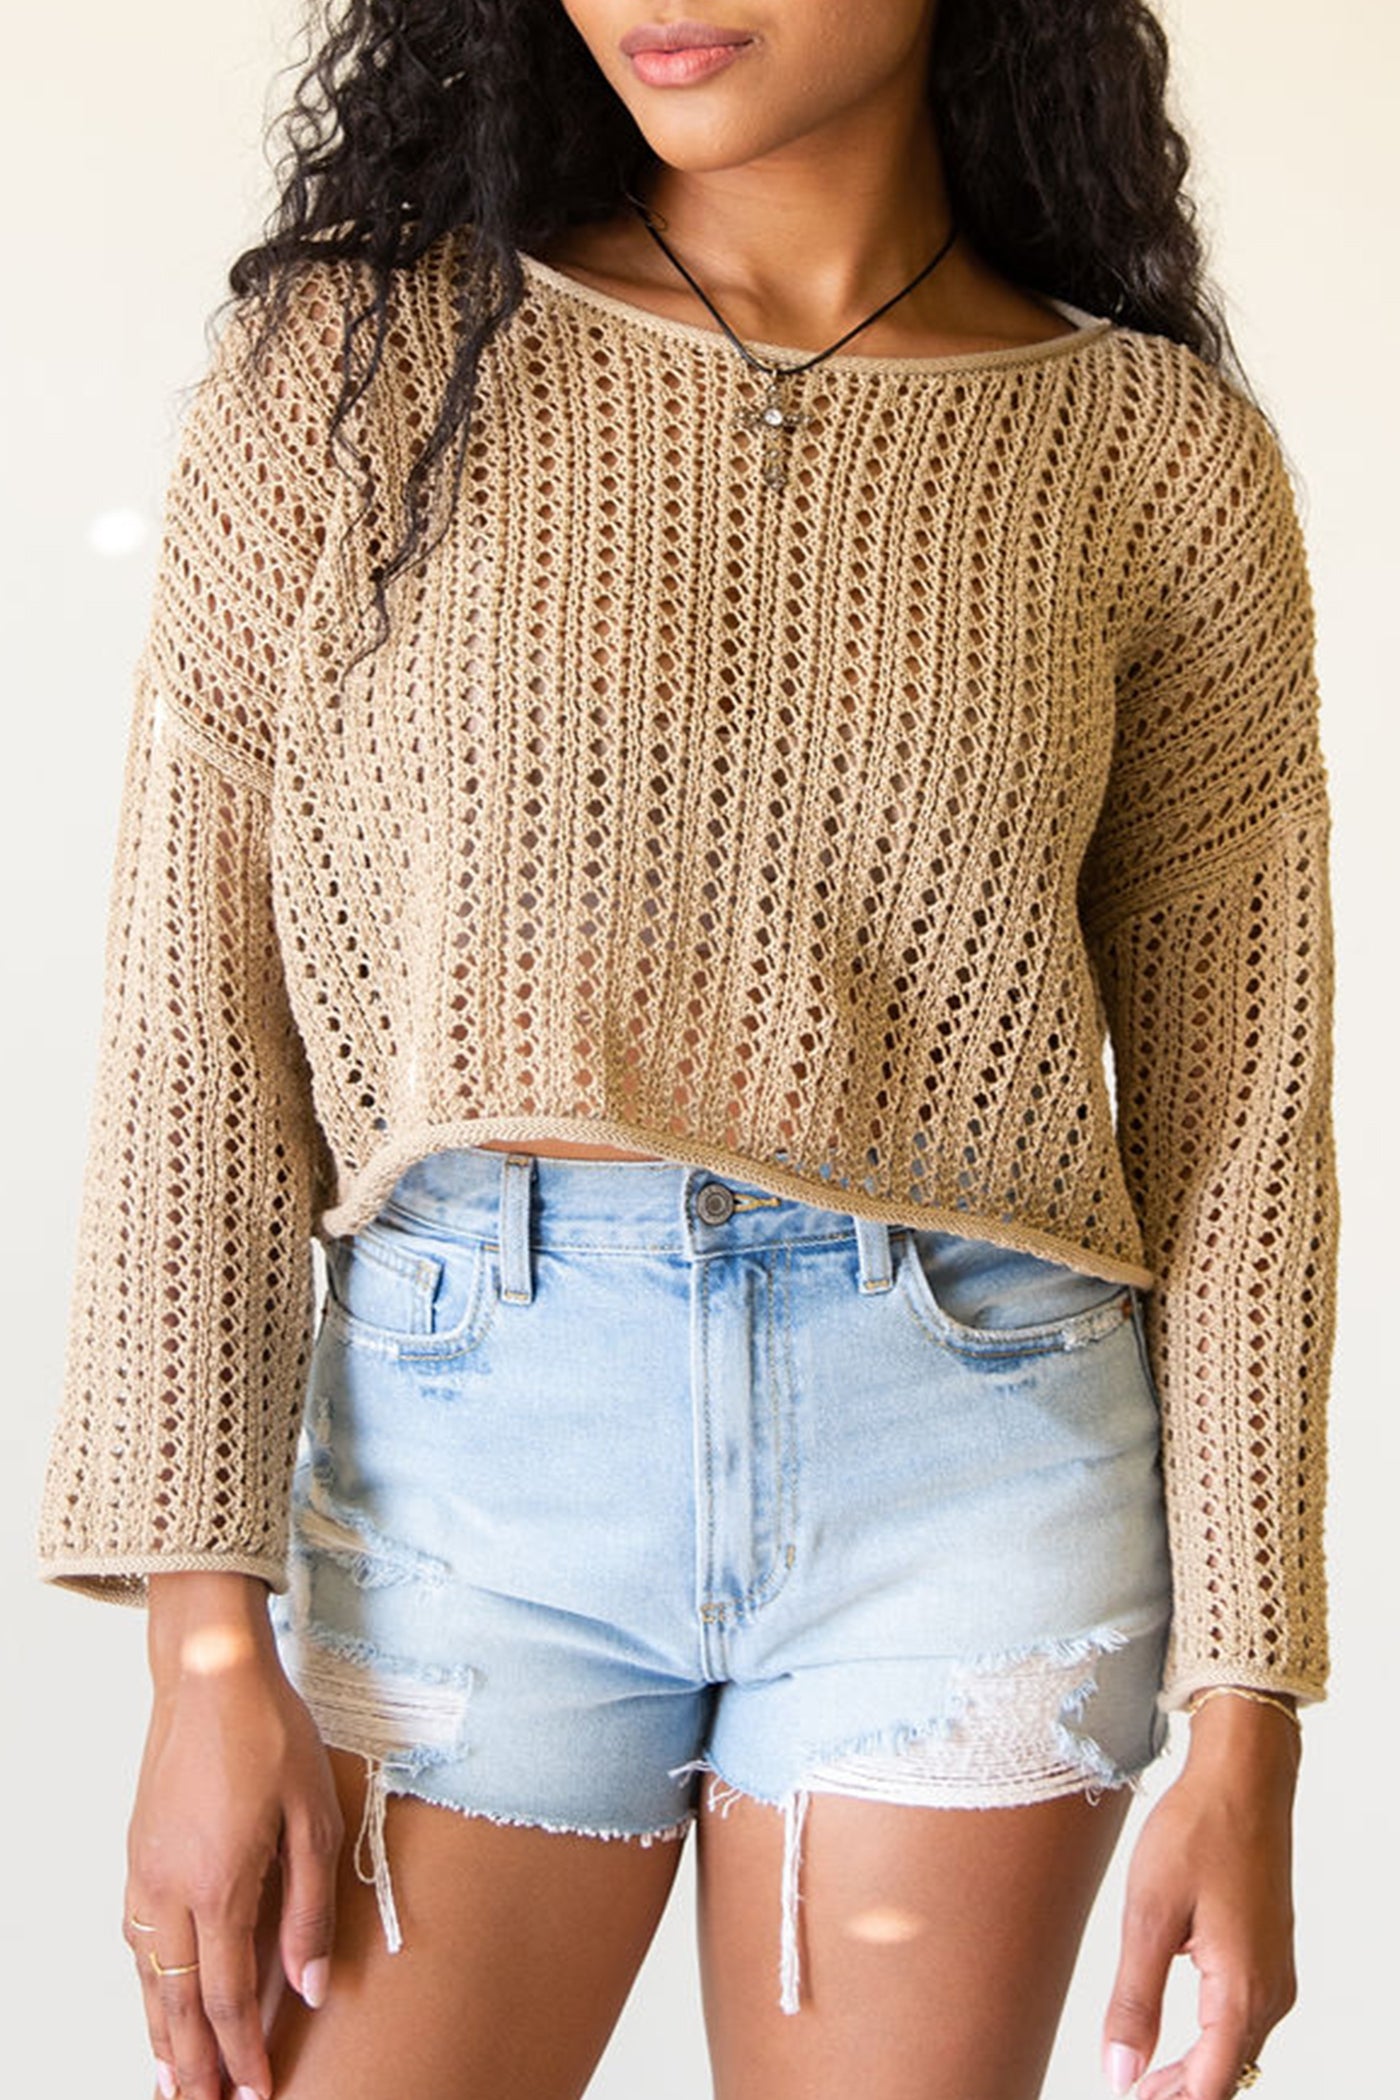 Lose Somebody Cropped Crochet Top